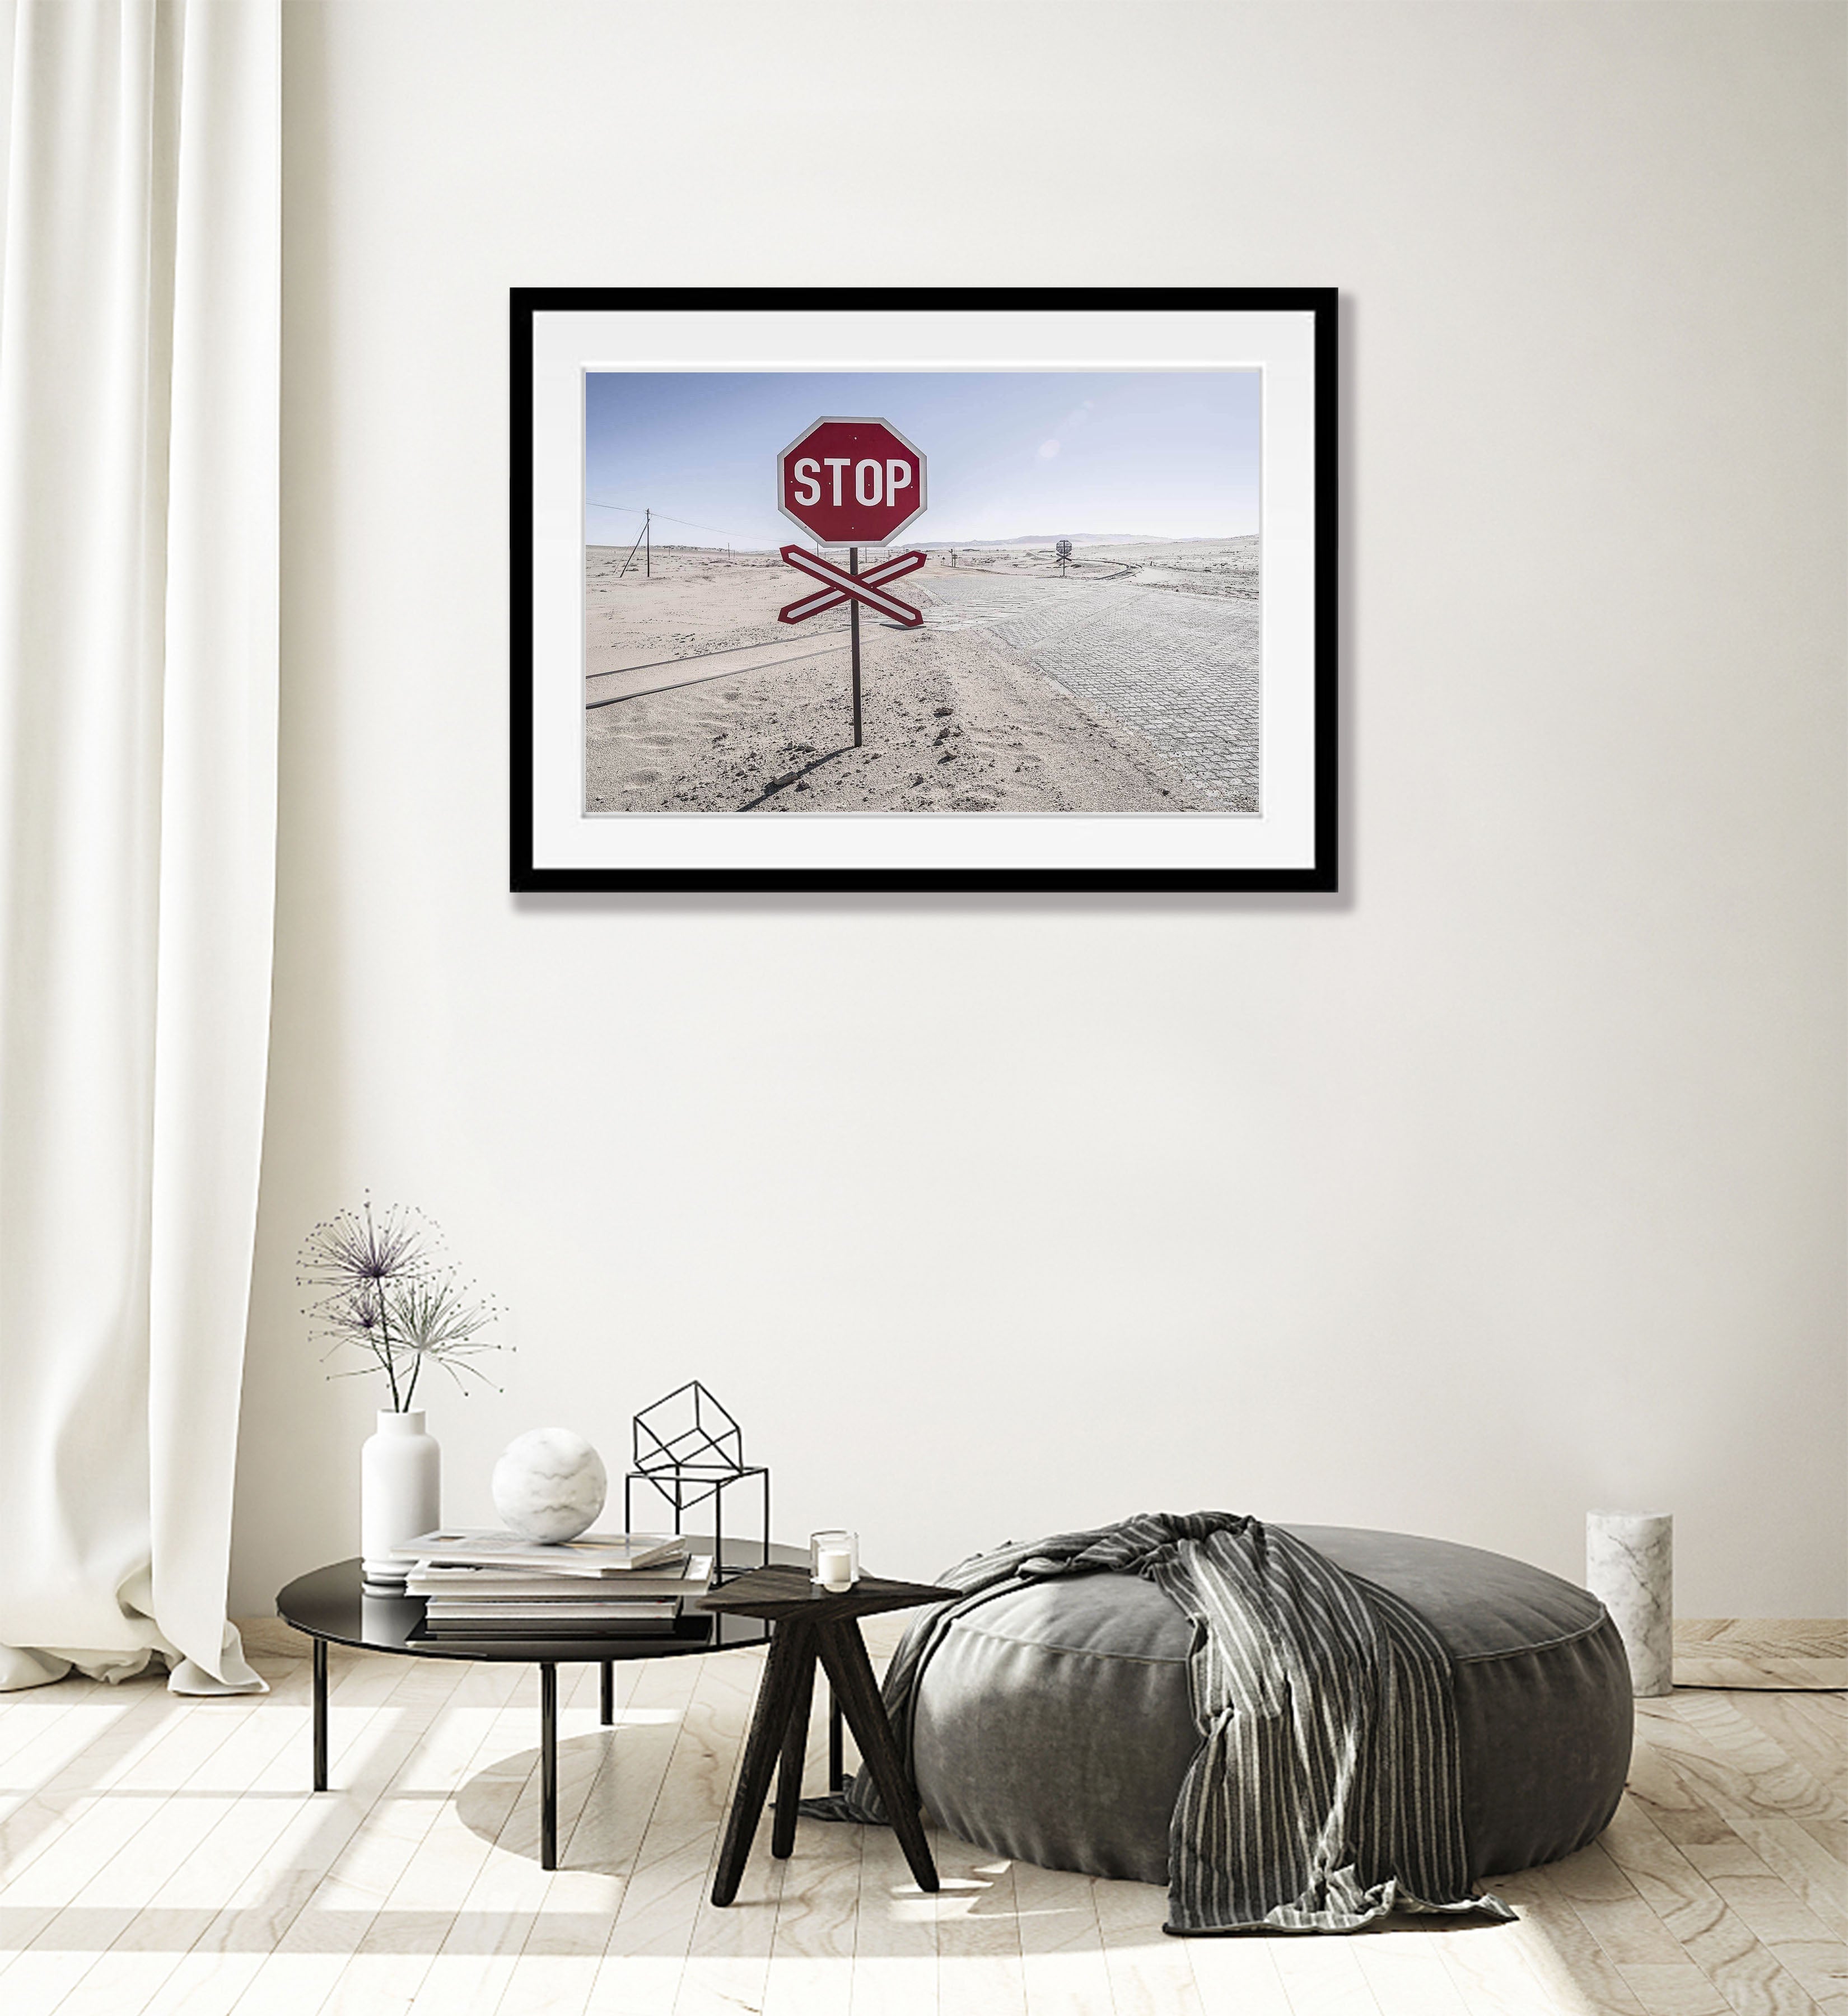 Stop Sign in the middle of nowhere, Namibia, Africa